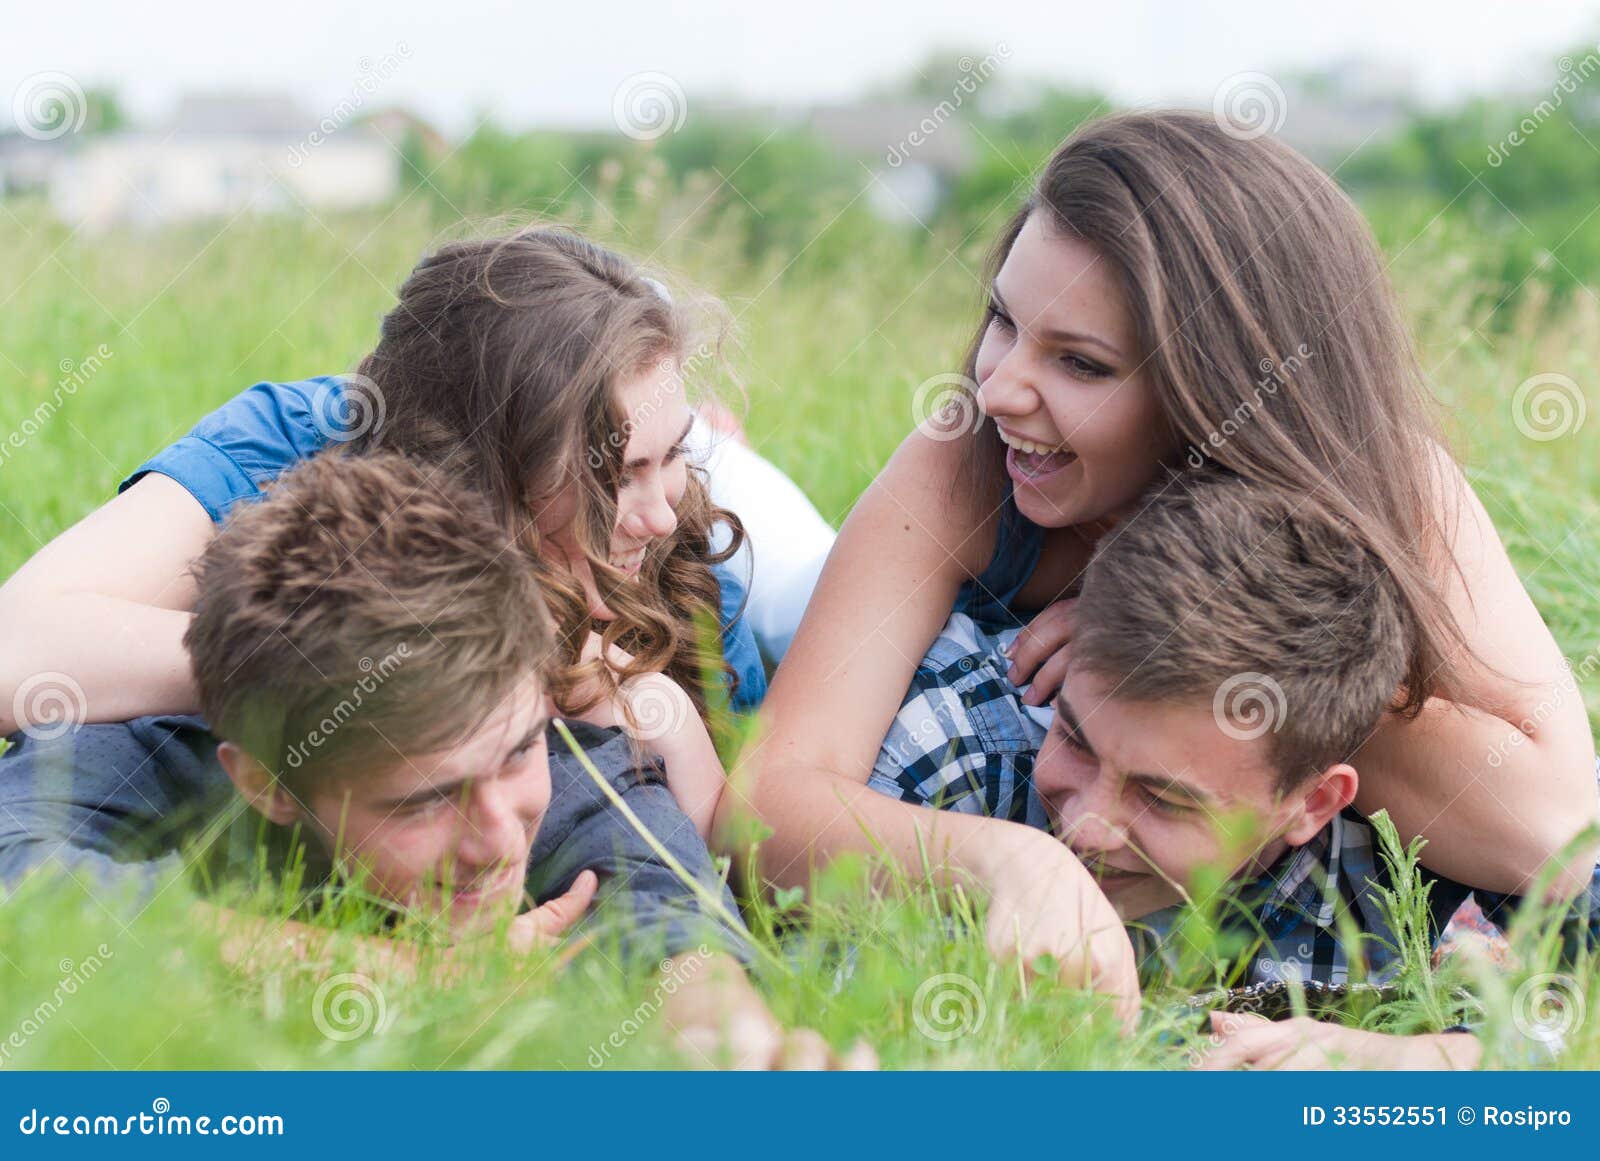 Four Young People Friends Lying Together on Green Grass Outdoors ...